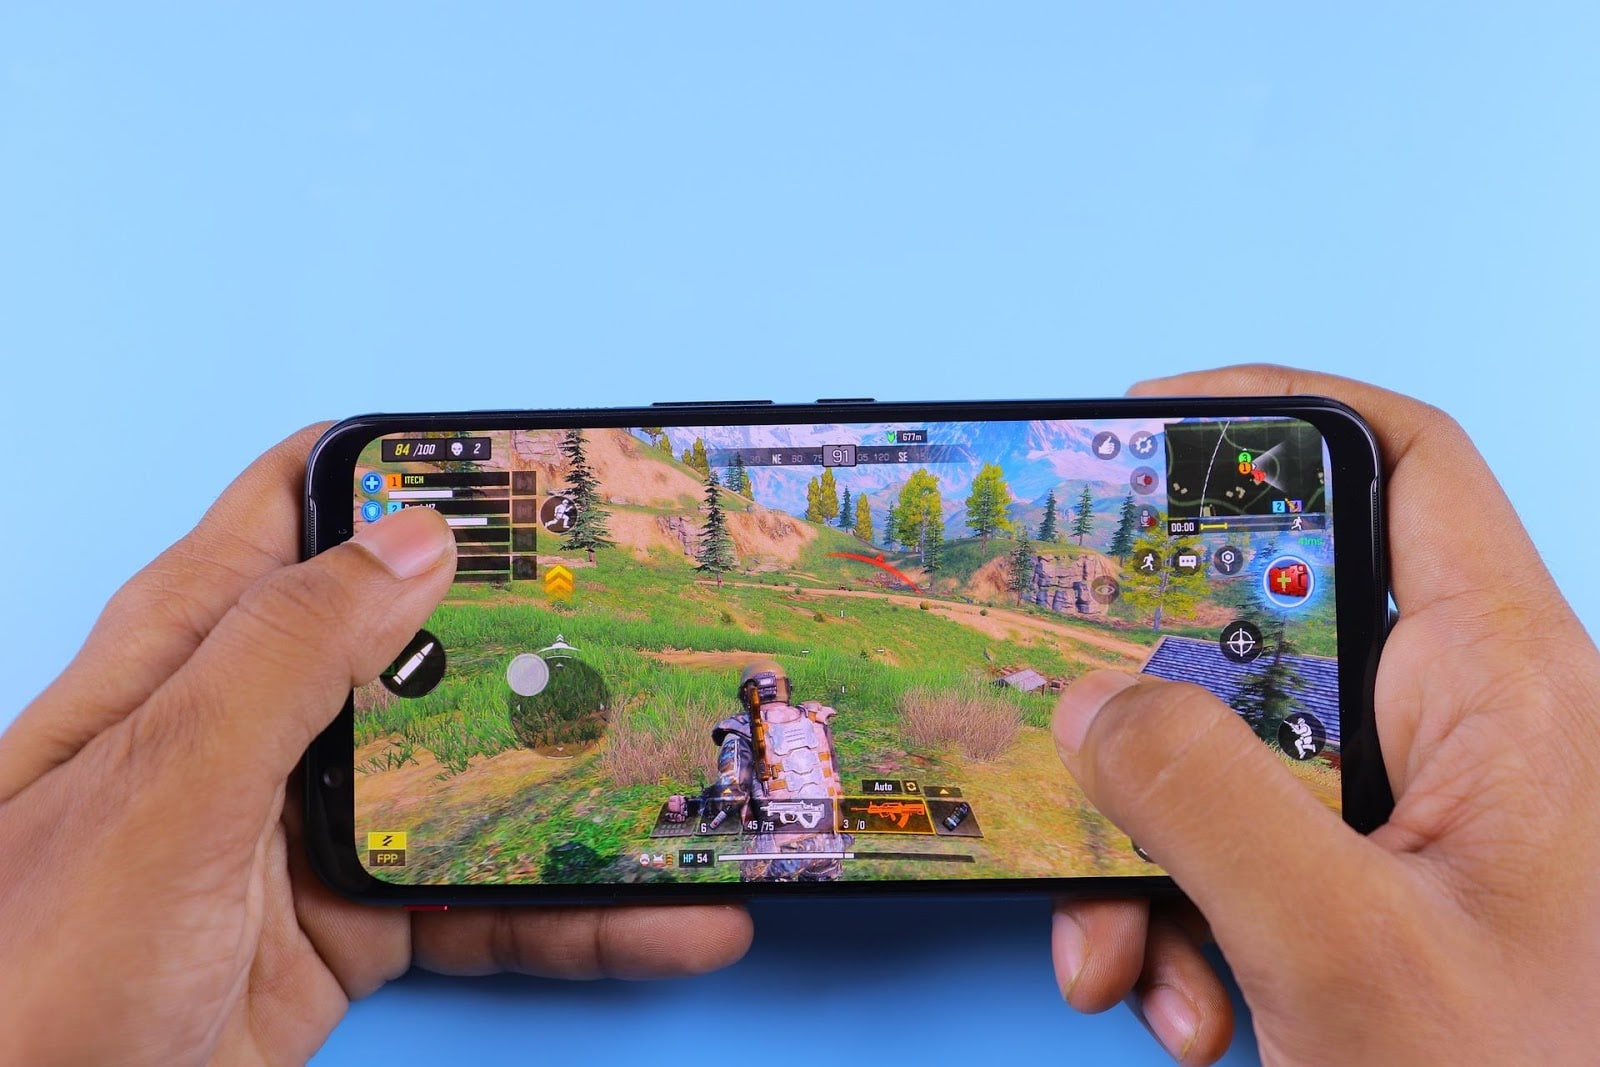 The All-in-One Game Engine to Create Mobile Games